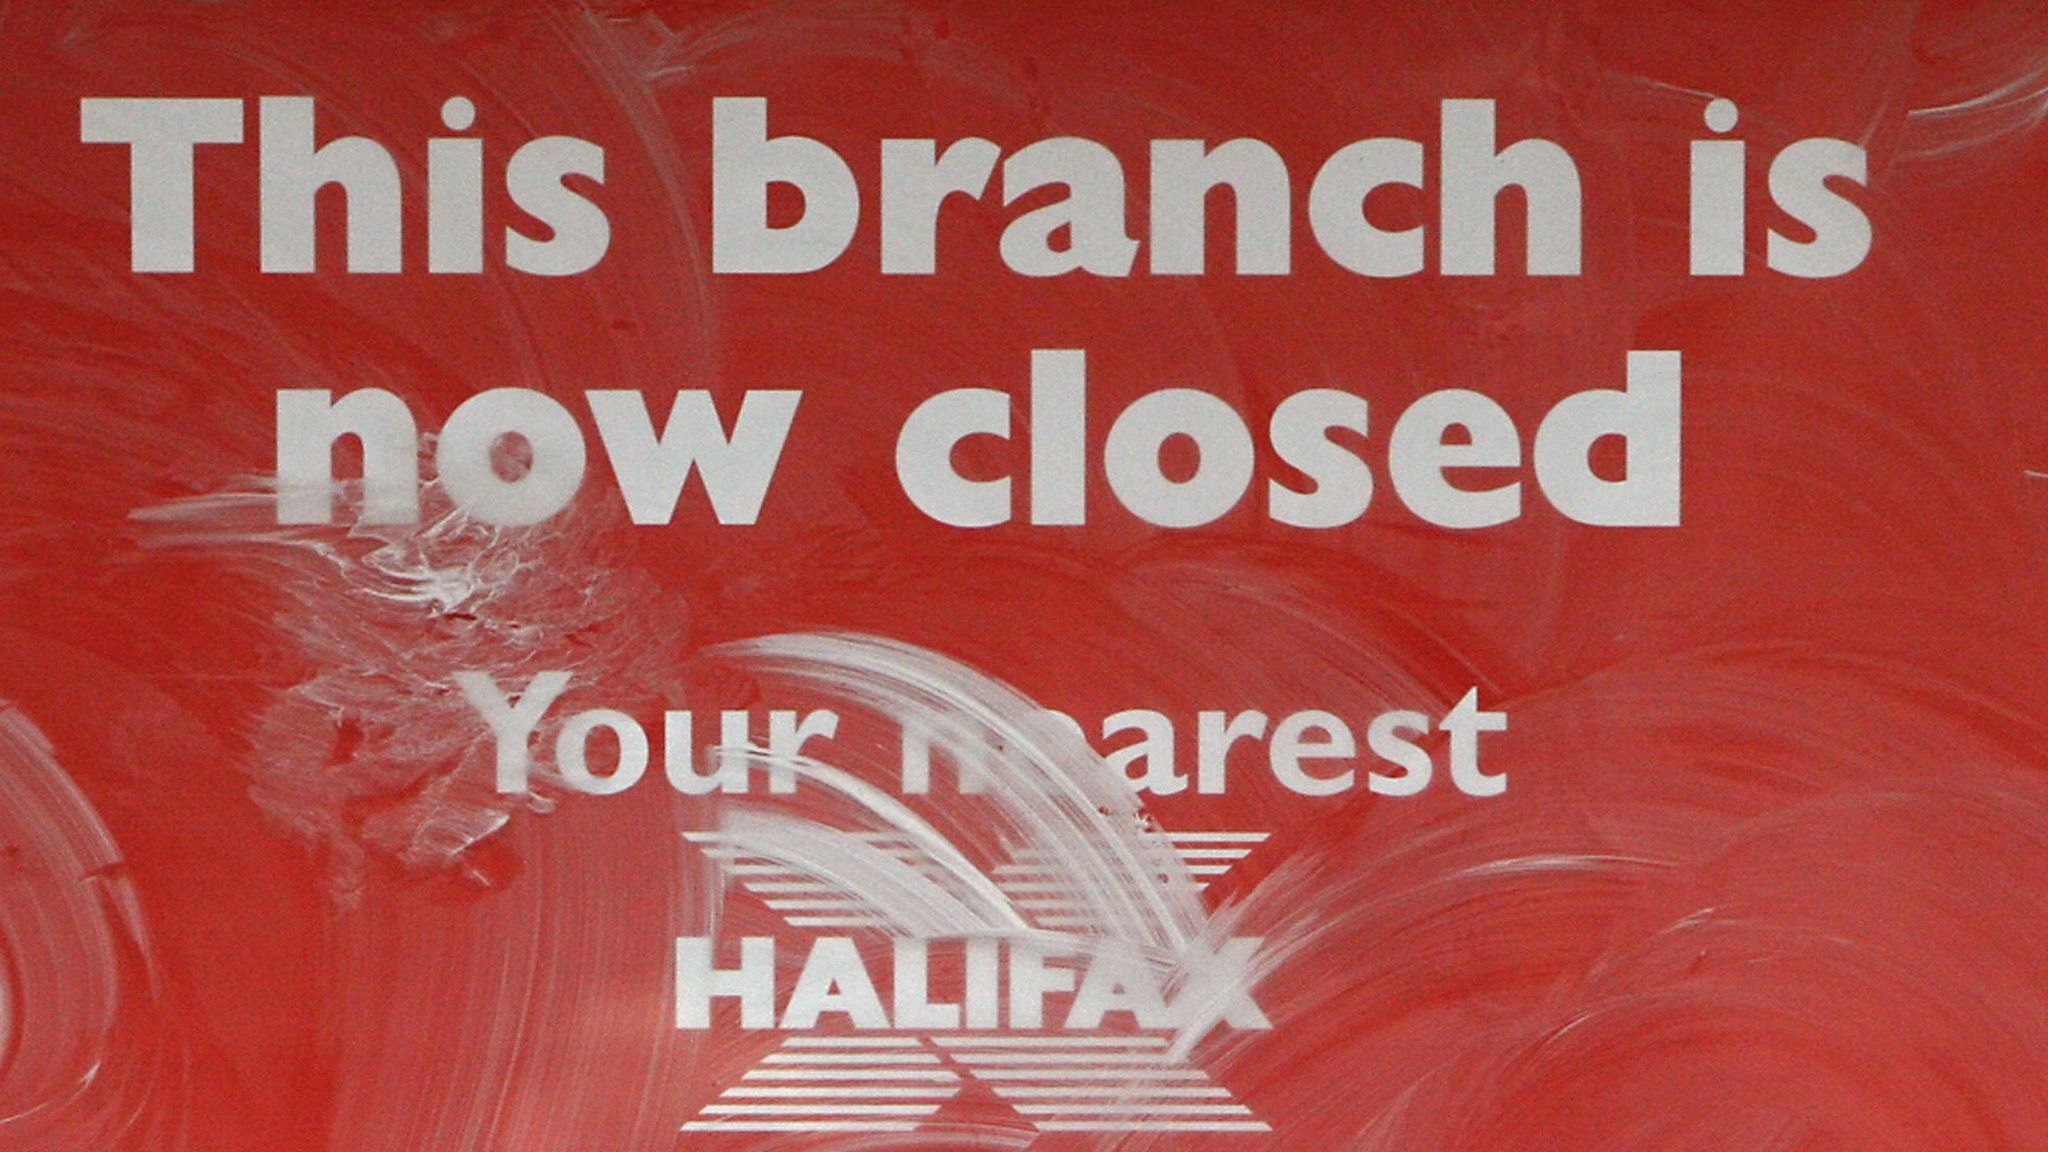 This branch is now closed